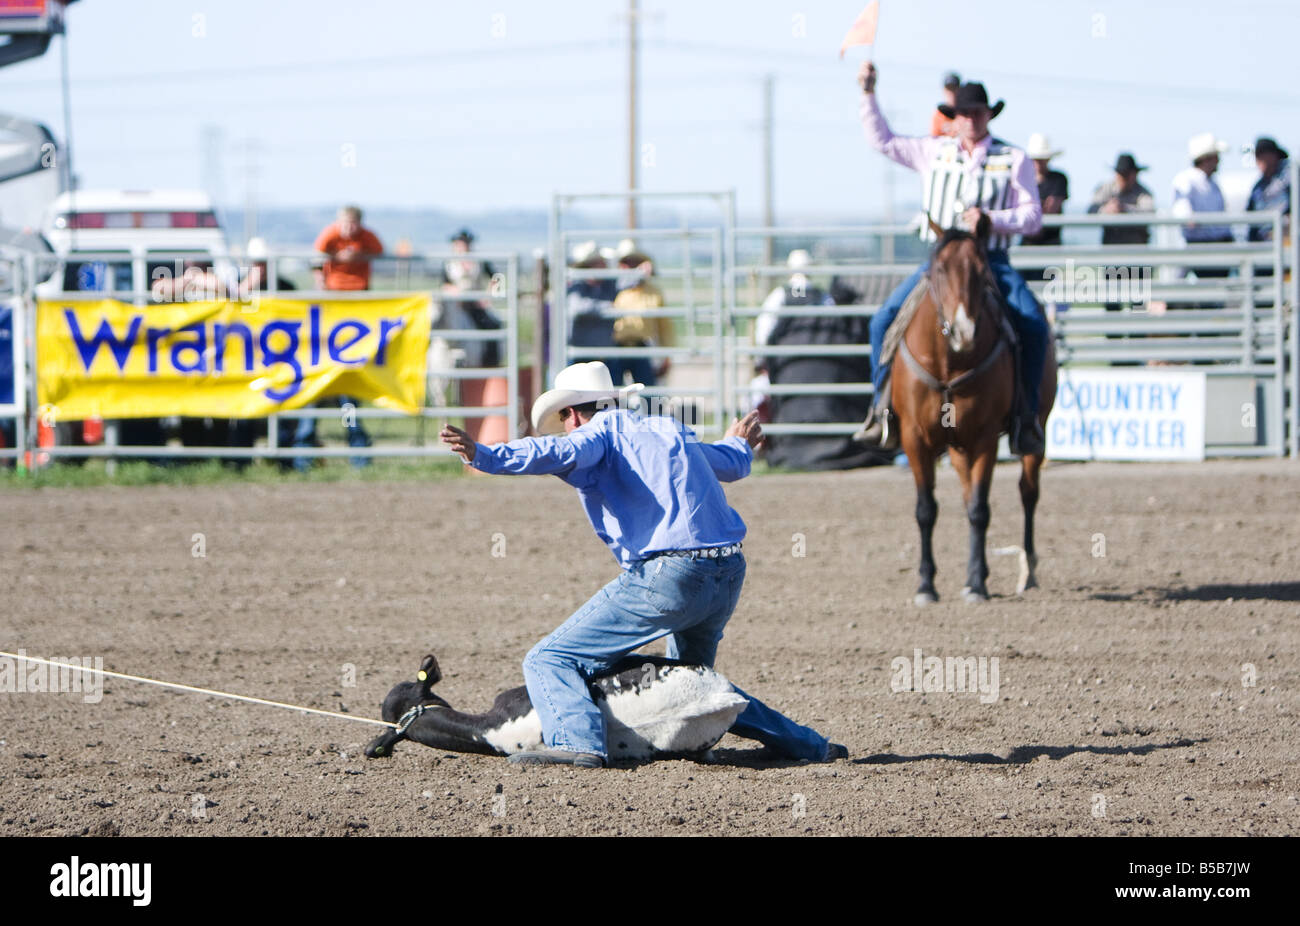 A cowboy chasing a calf in the calf roping contest at a rodeo. Stock Photo